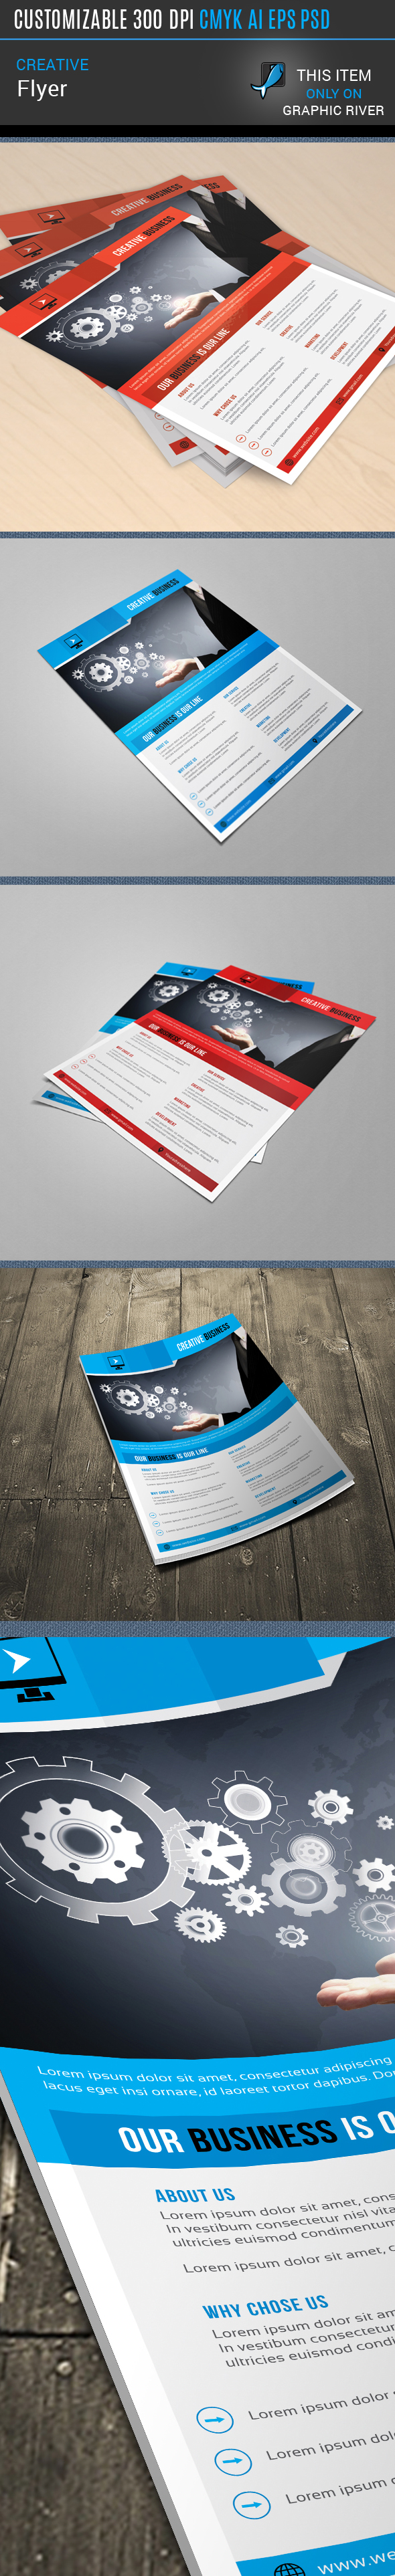 ads advert art artistic business flyer colorful corporate creative graphic